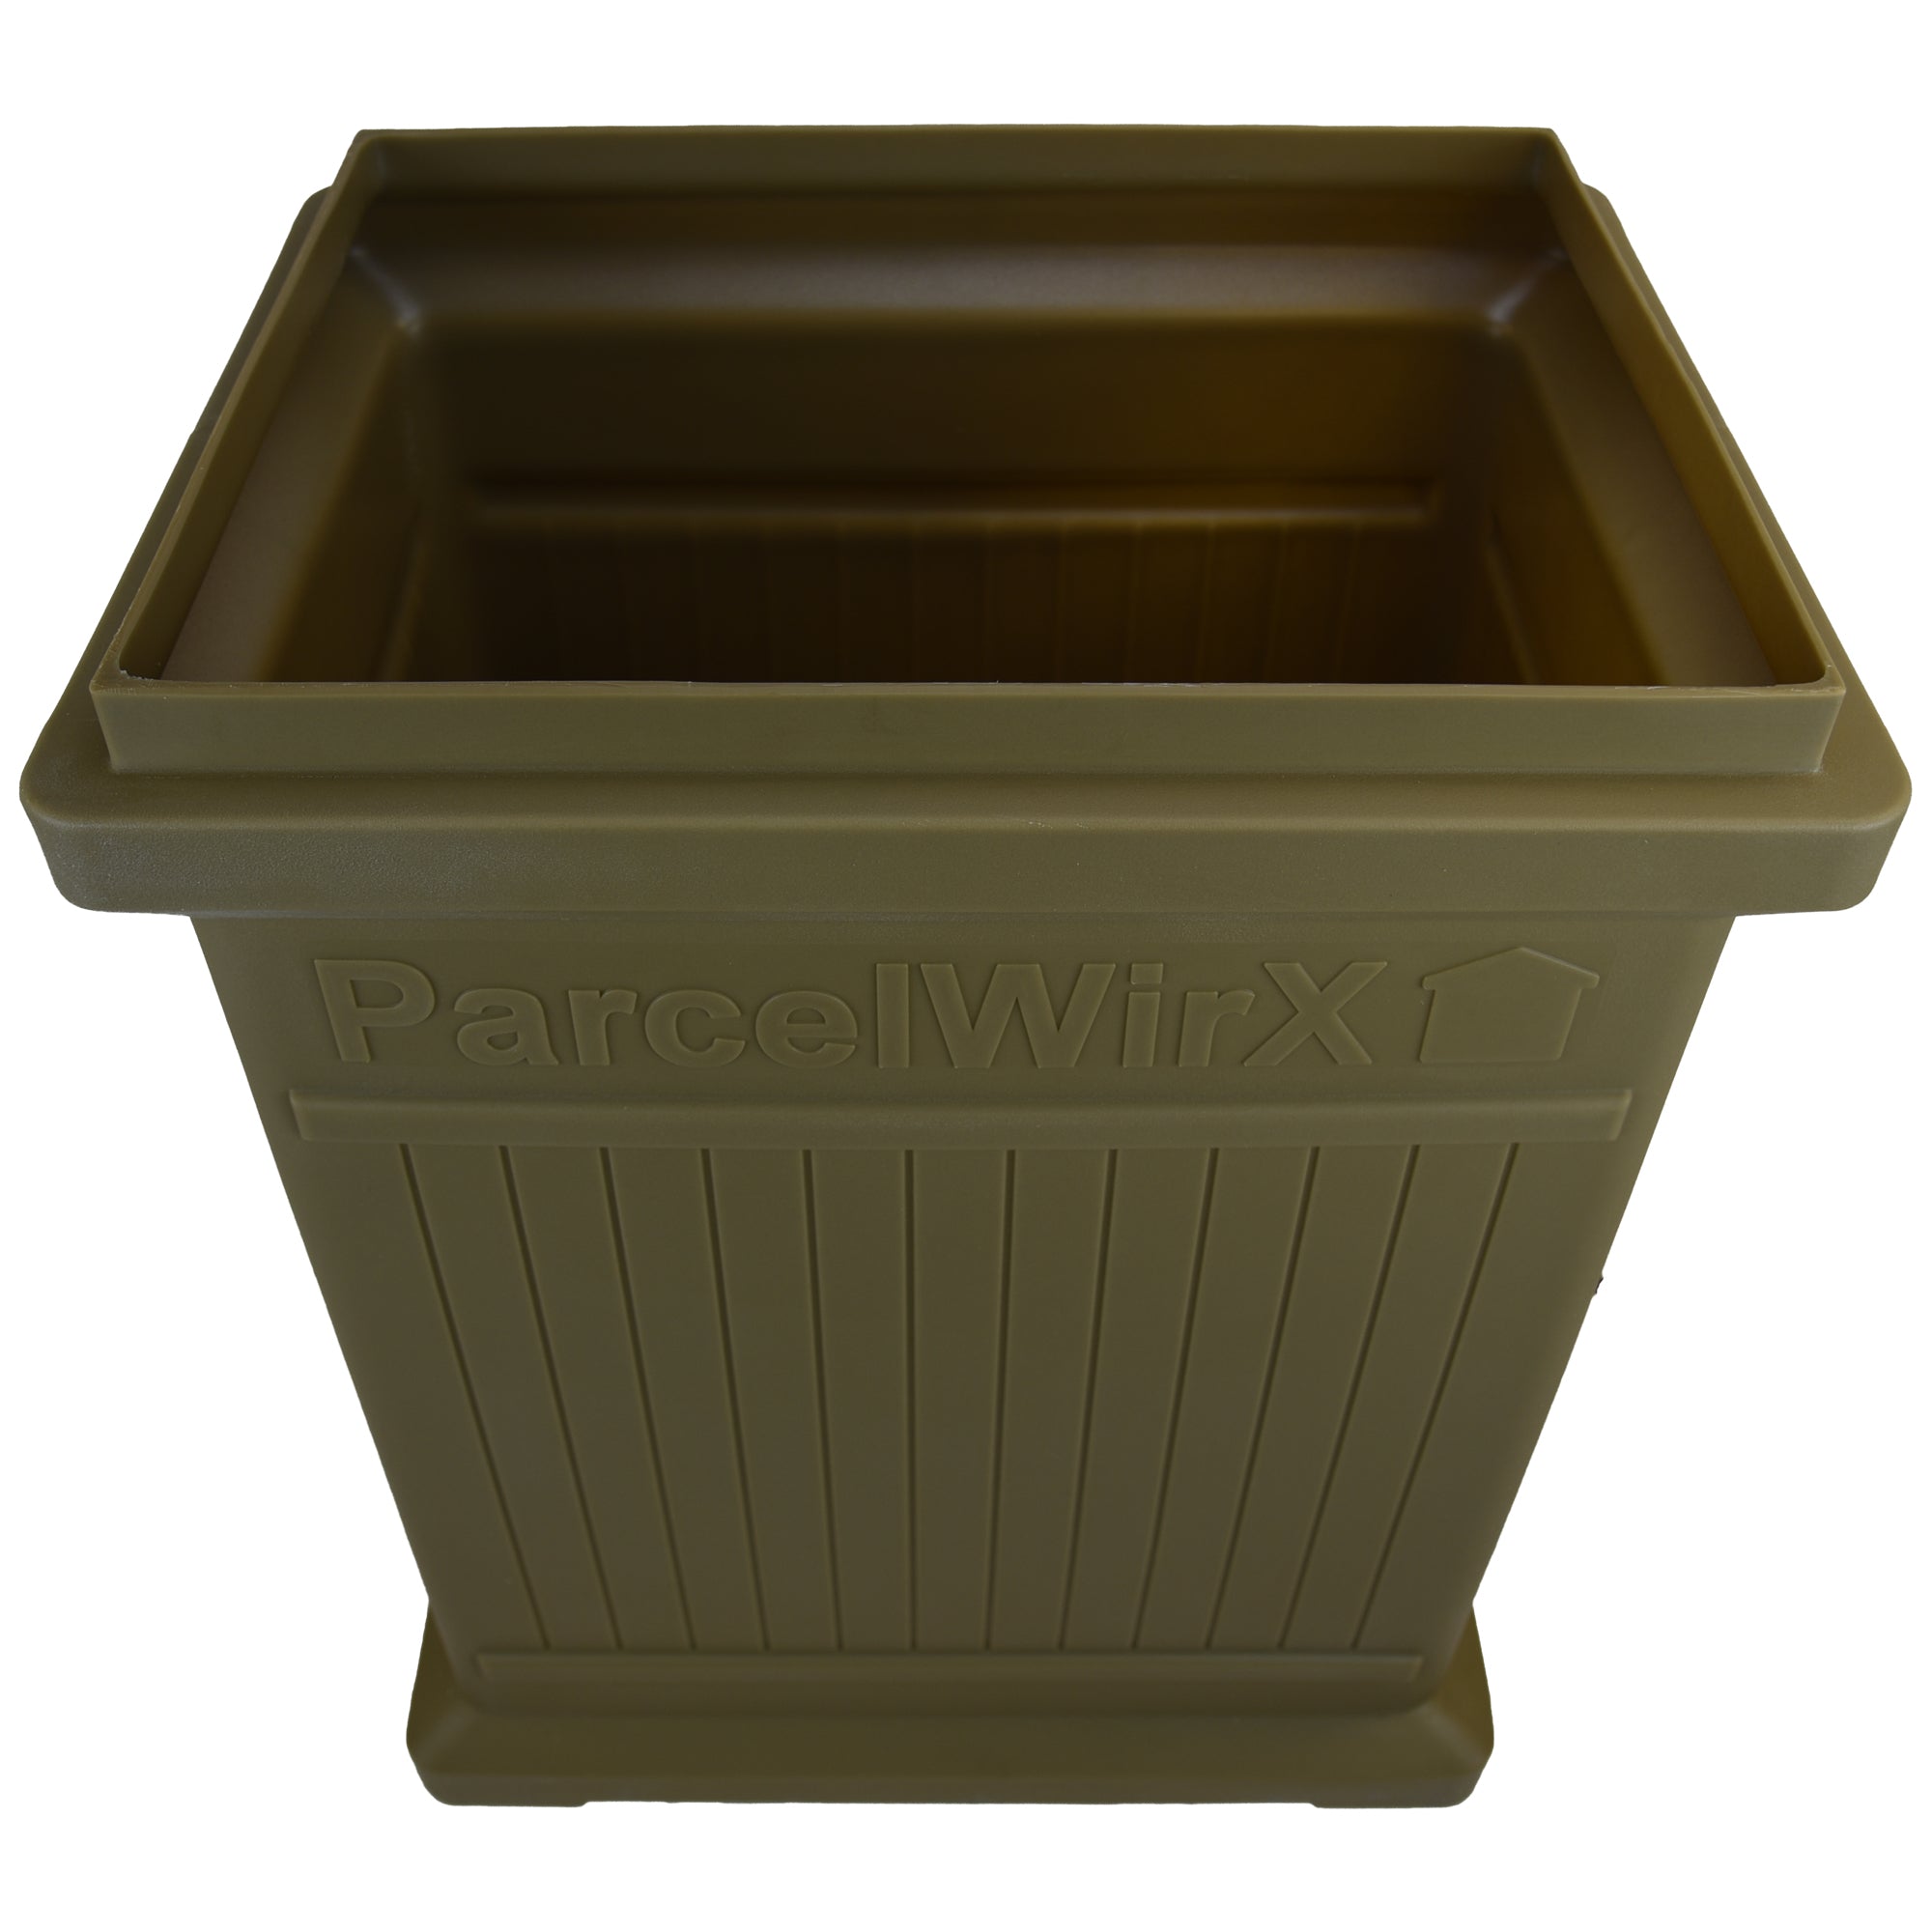 ParcelWirx Standard vertical dropbox in oak from the top with lid off, on white background